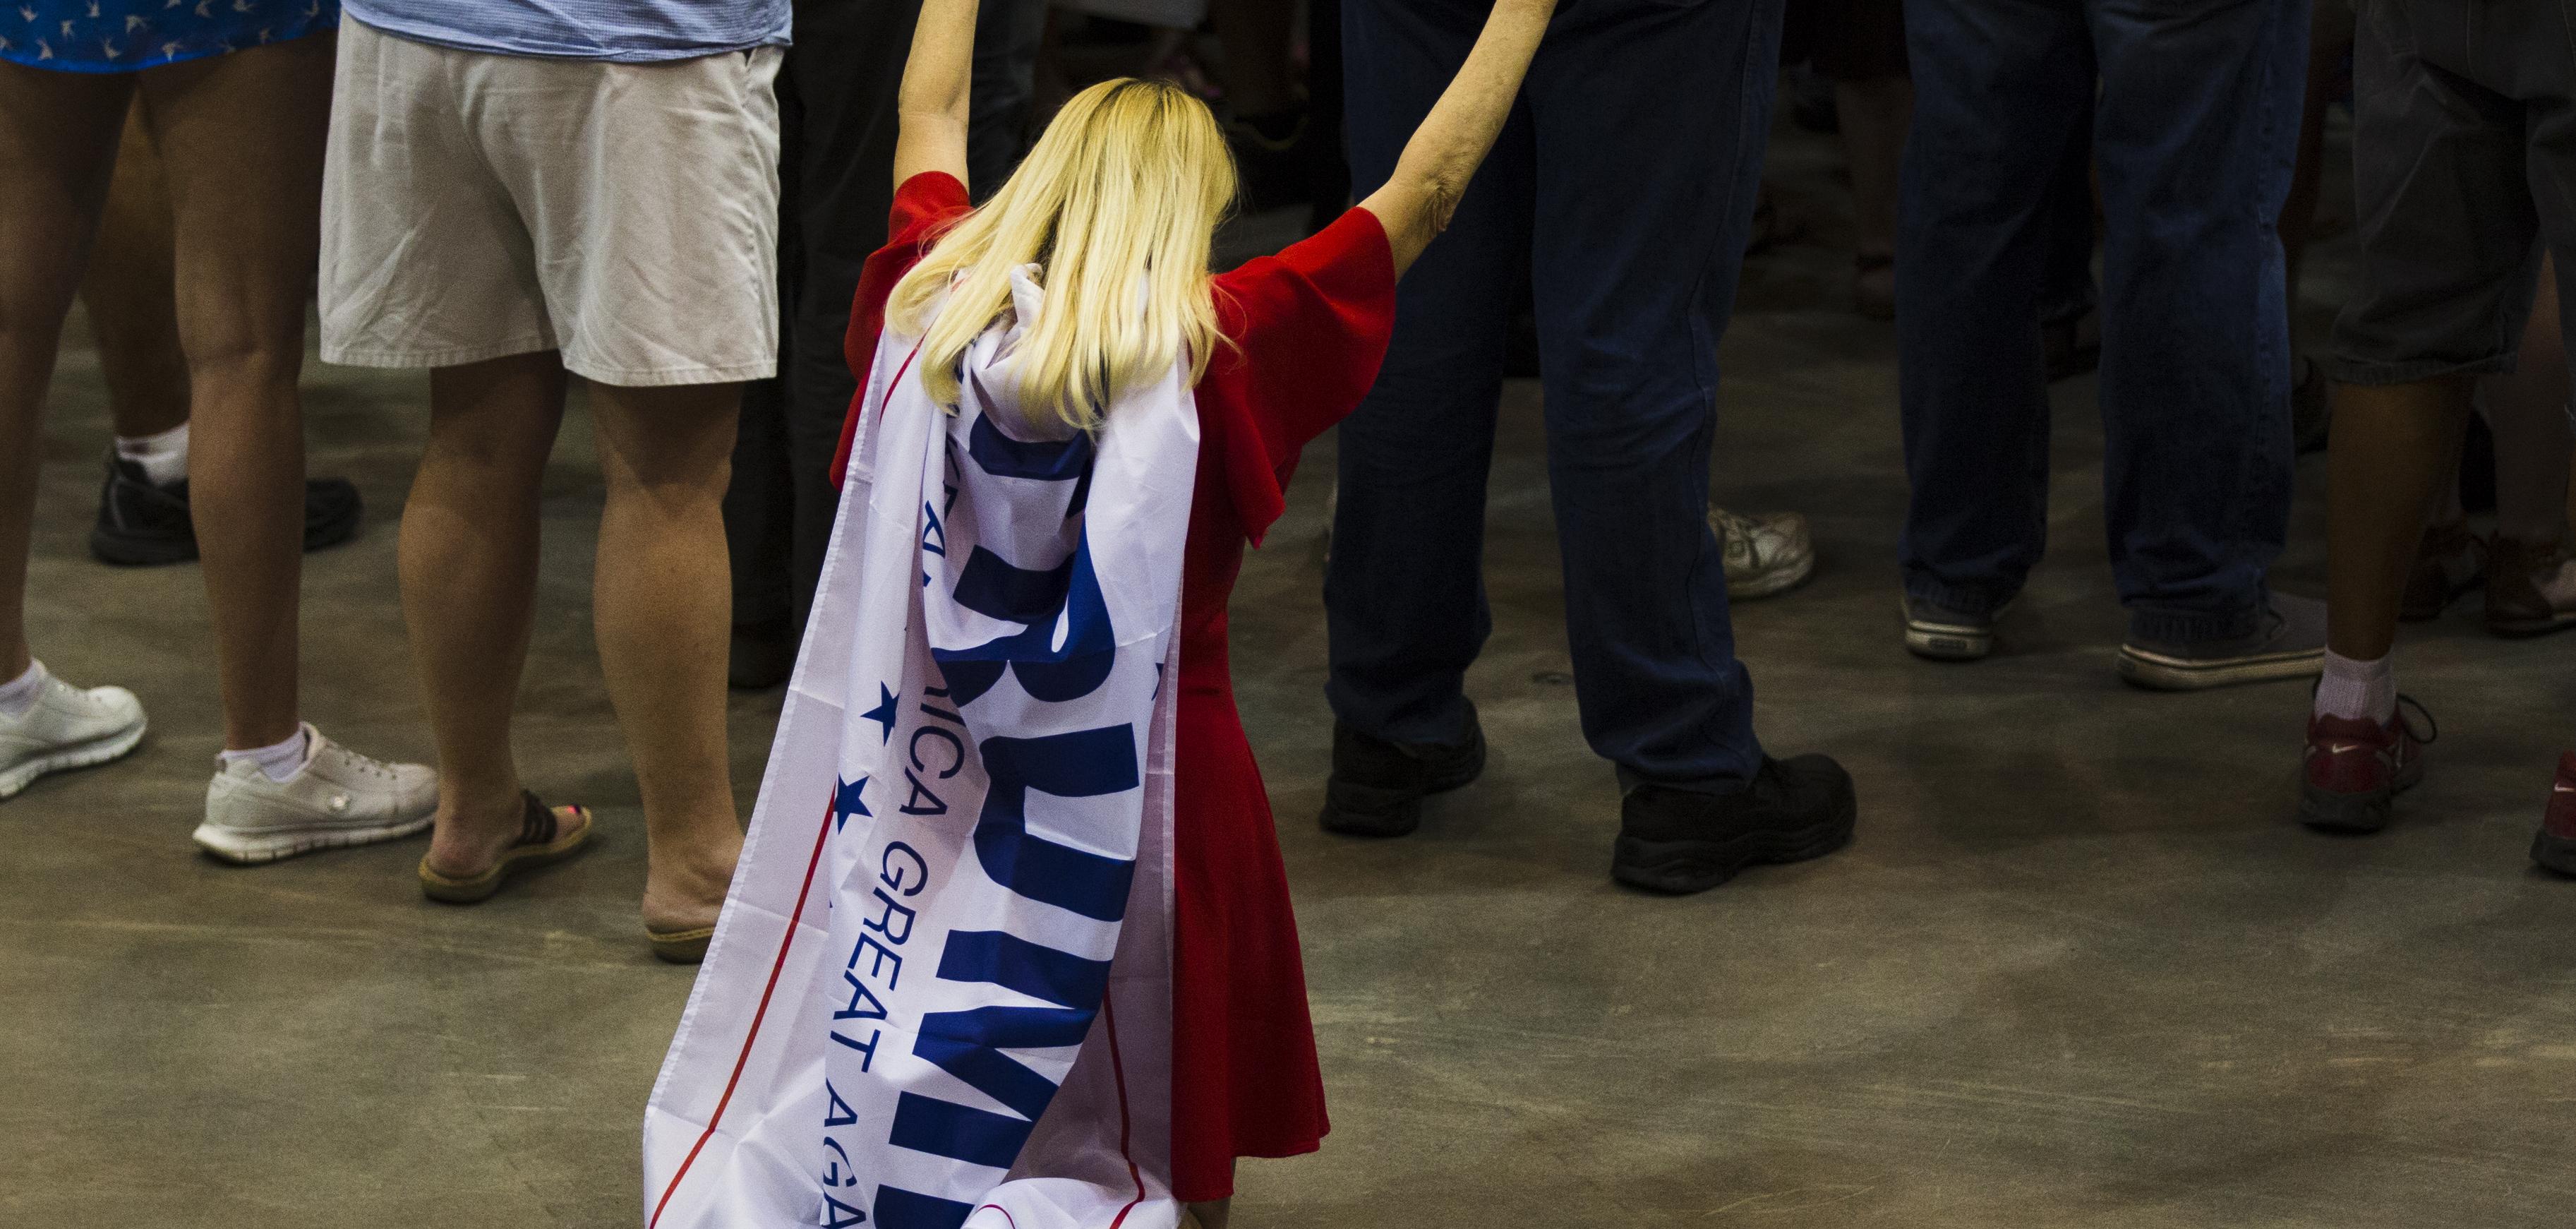 A white woman with blond hair, kneeling with her arms in the air, a Trump flag tied around her neck and hanging down her back